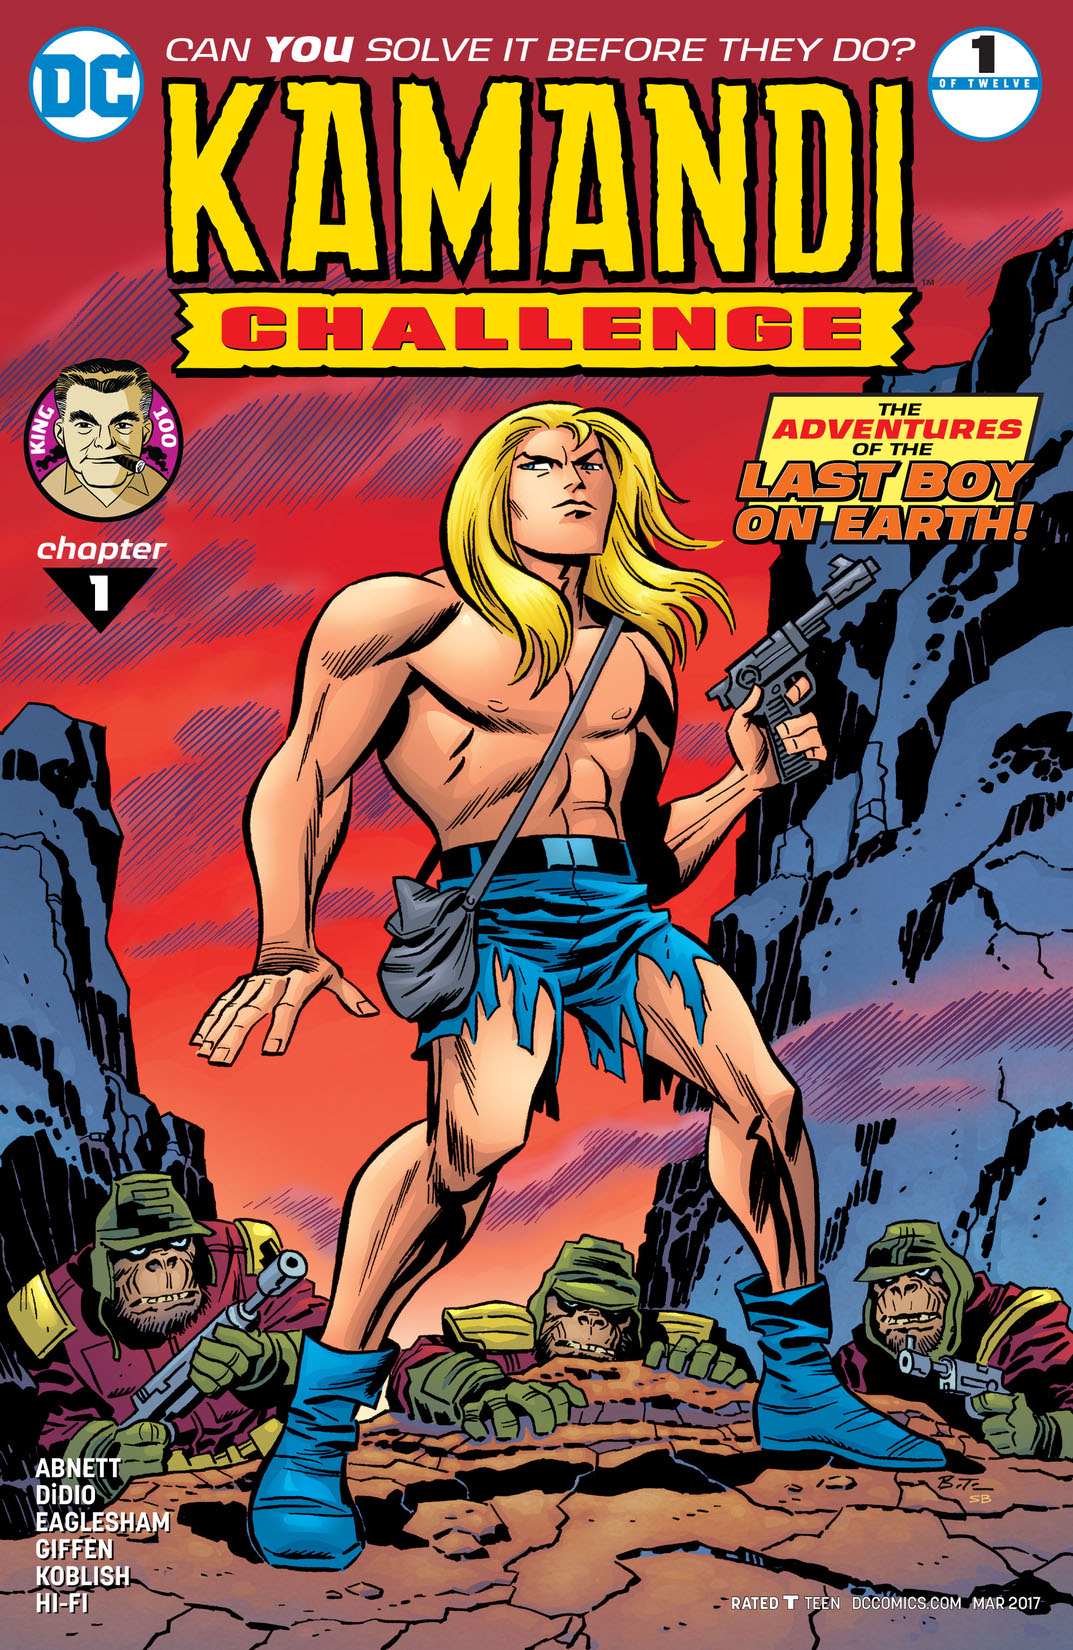 The Kamandi Challenge #1 preview images